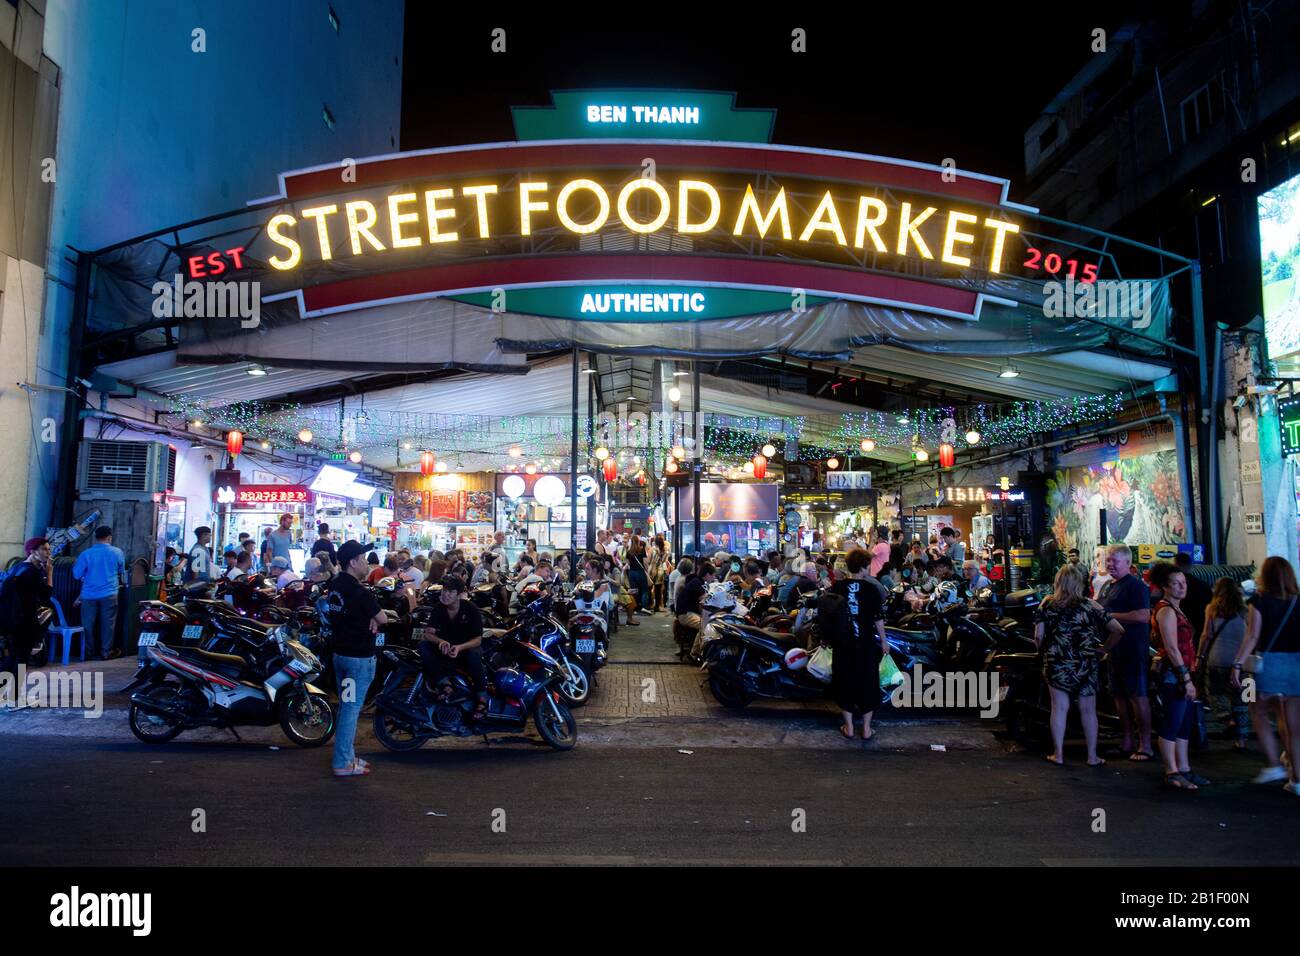 Vietnam, Ho Chi Minh City: atmosphere in the evening at the Ben Thanh Street  Food Market Stock Photo - Alamy